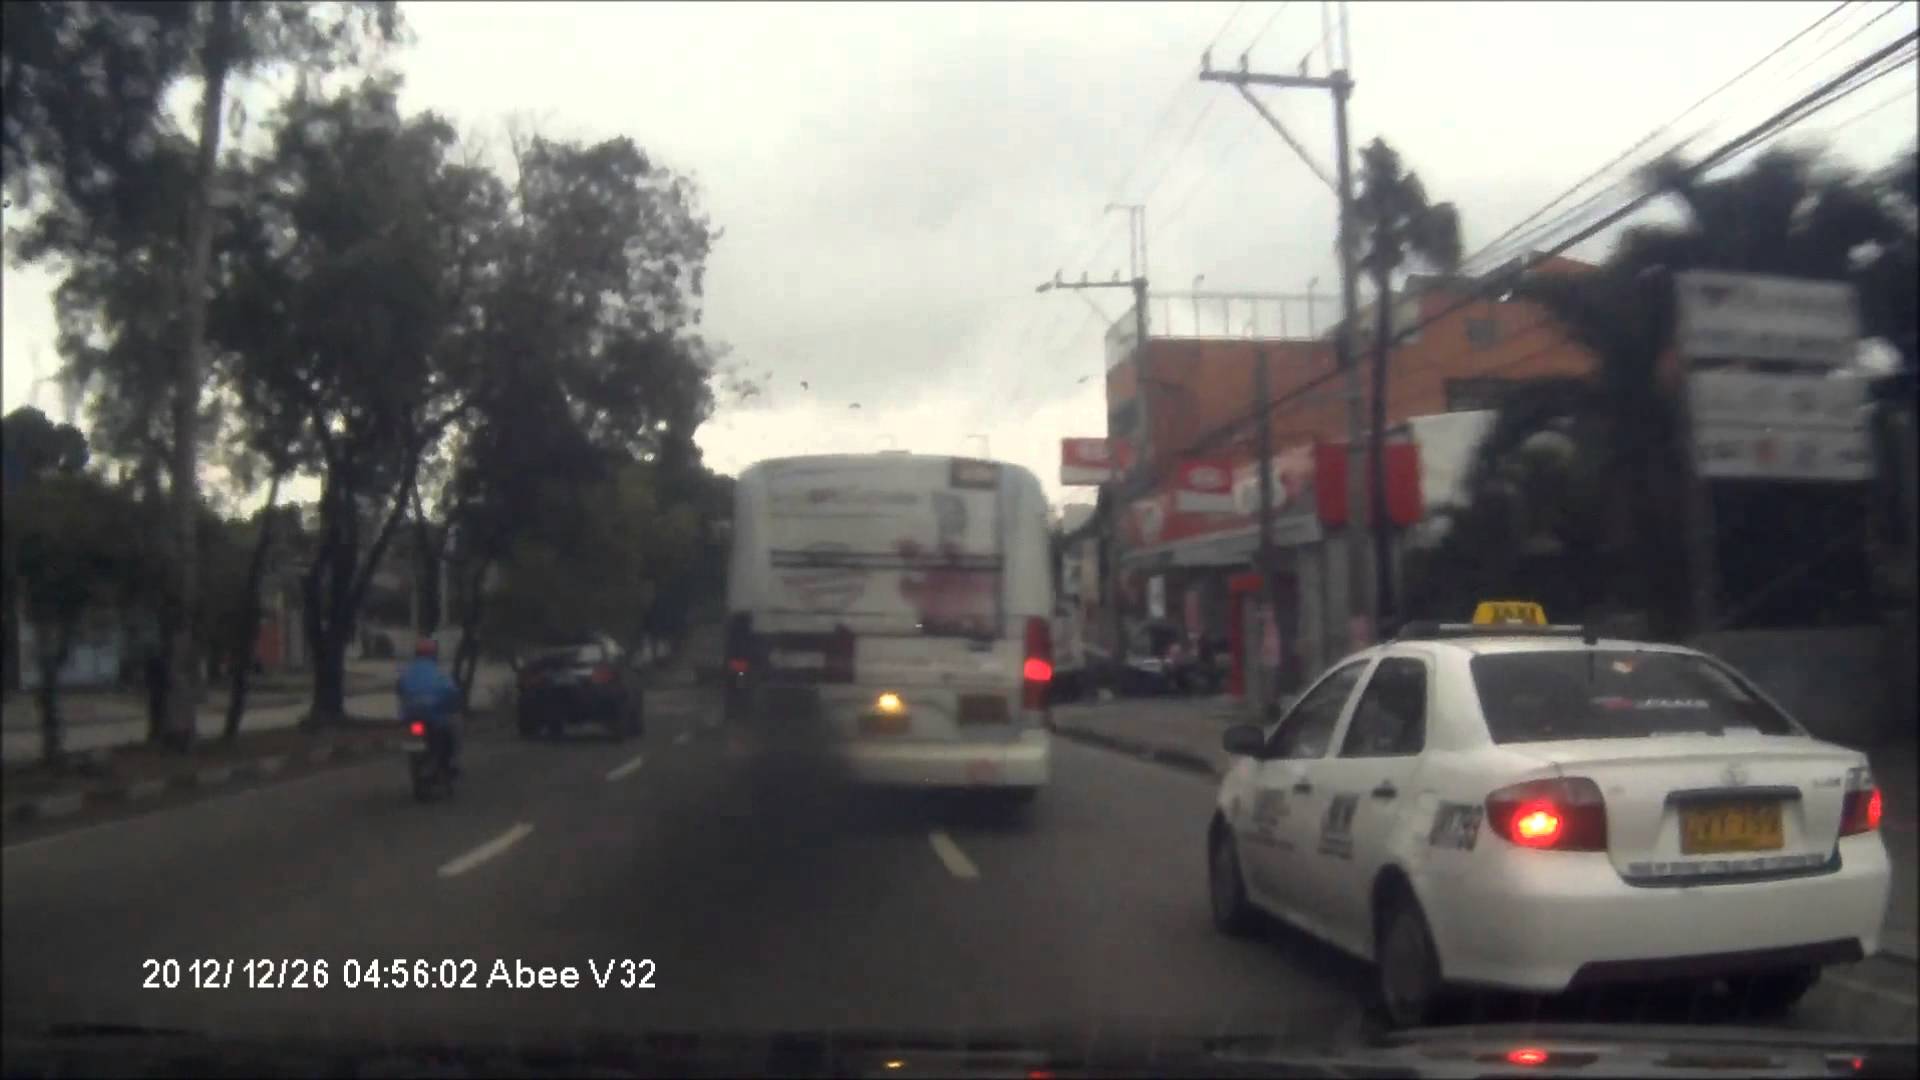 Philippines Reckless Drivers: Smoke Belching and Reckless Bus and ...